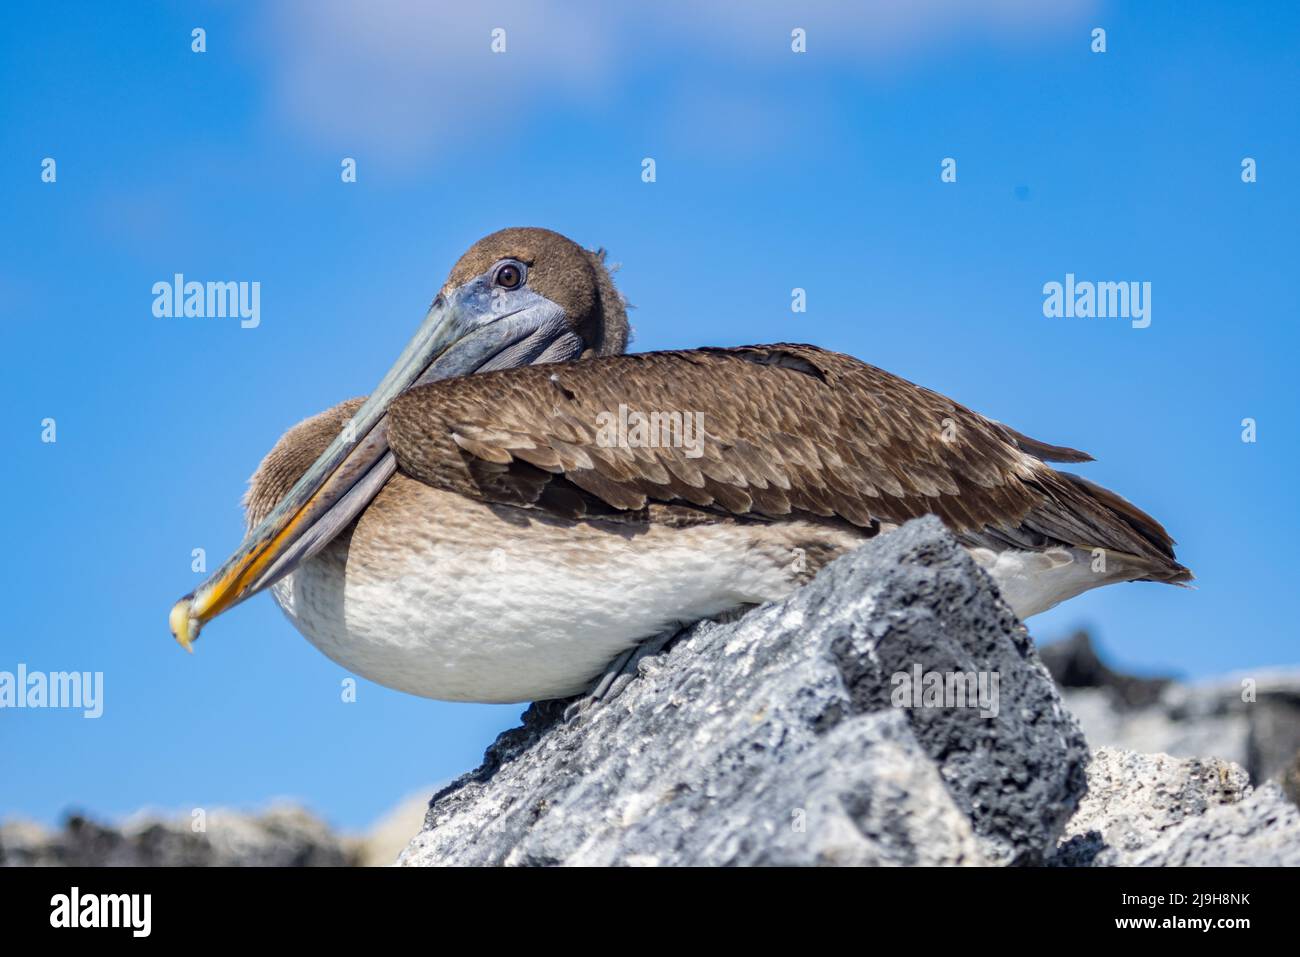 The Galapagos brown pelican (Pelecanus occidentalis urinator) sitting on a rock. A heavy waterbird with long bills used to scoop-net their prey. Stock Photo